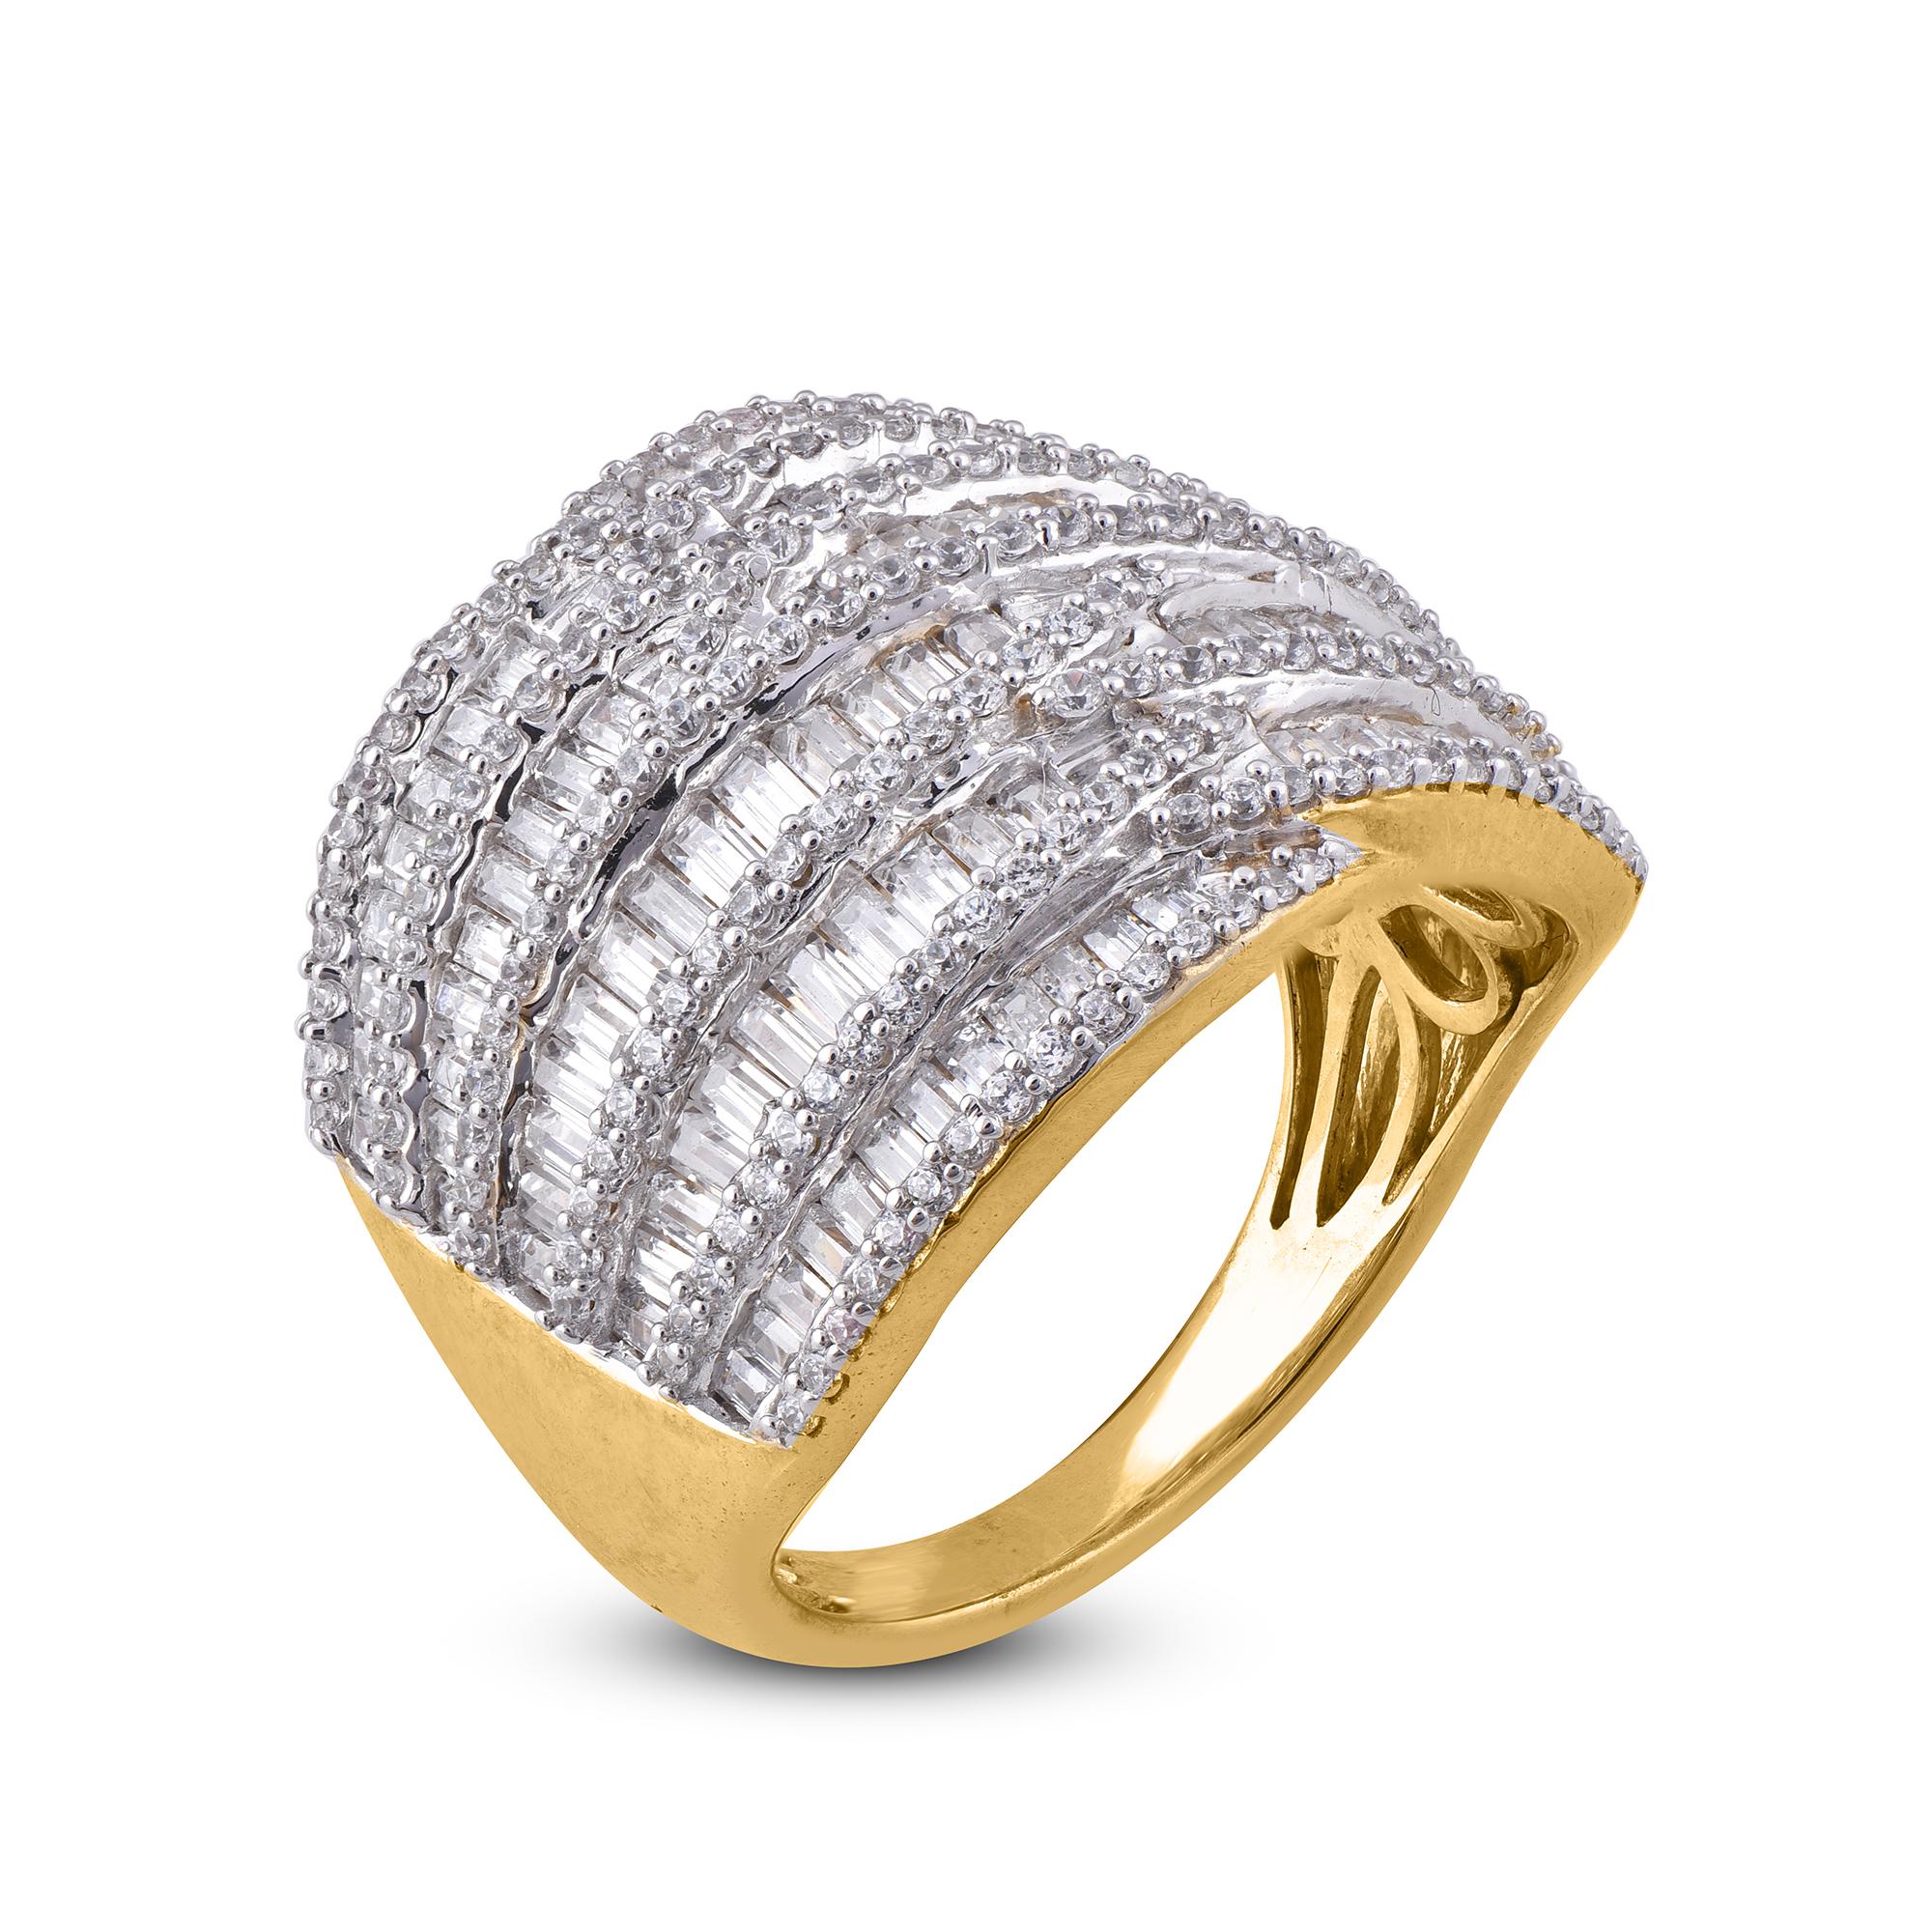 Truly exquisite, she'll admire the effortless look of this graceful diamond dome fashion ring. The ring is crafted from 14 karat gold in your choice of white, rose, or yellow, and features 185 round and 128 baguette diamond set in channel and prong